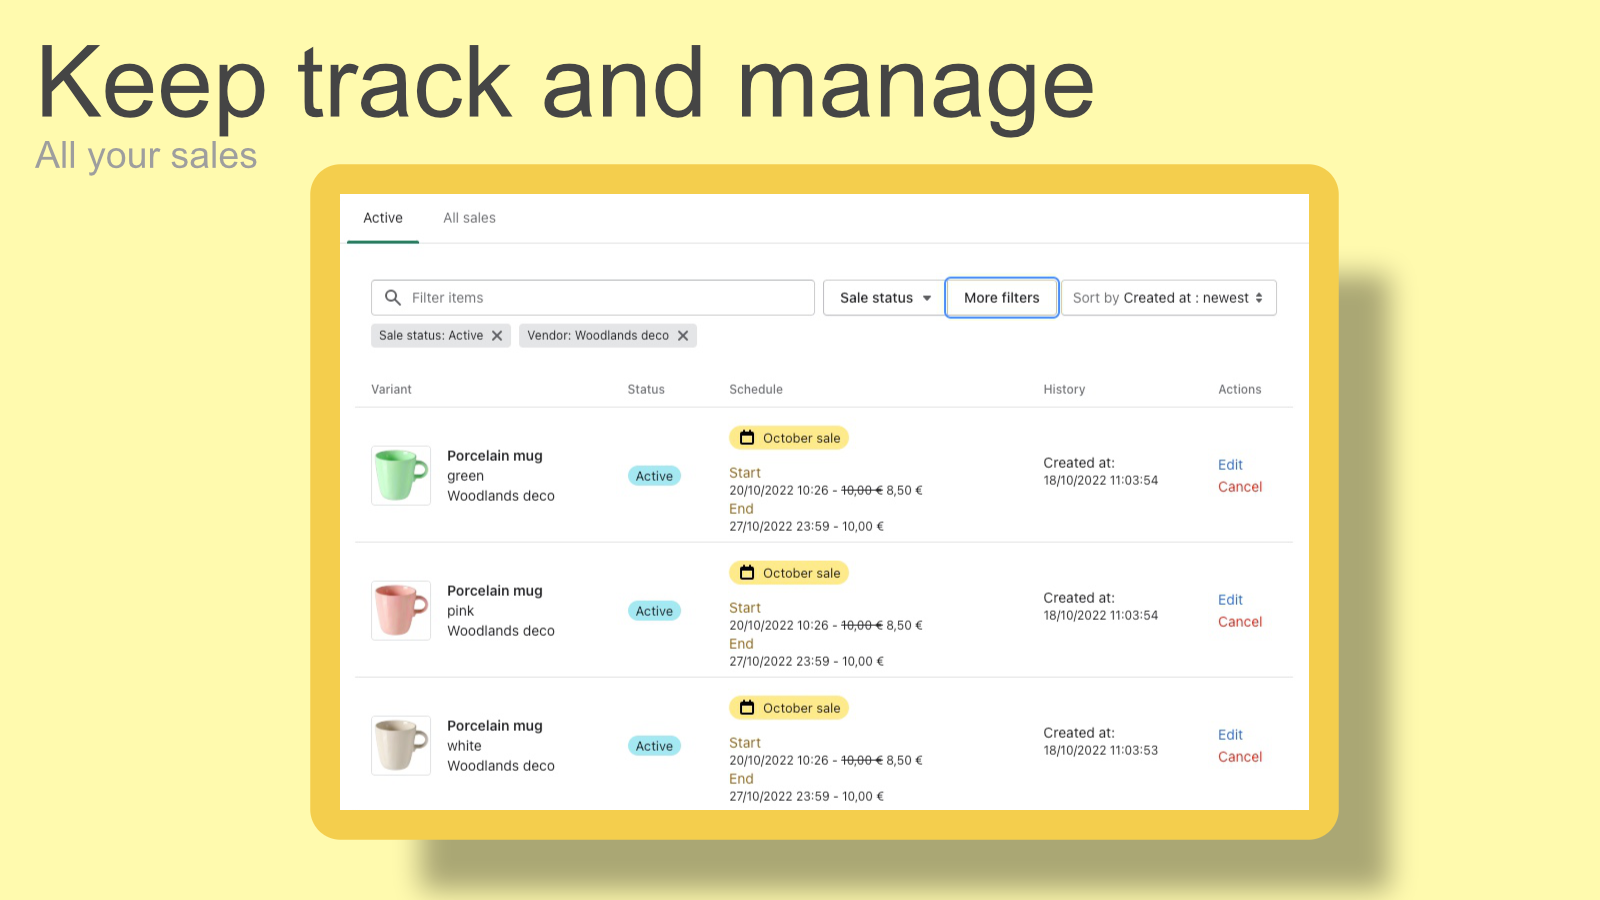 Keep track and manage all your sales